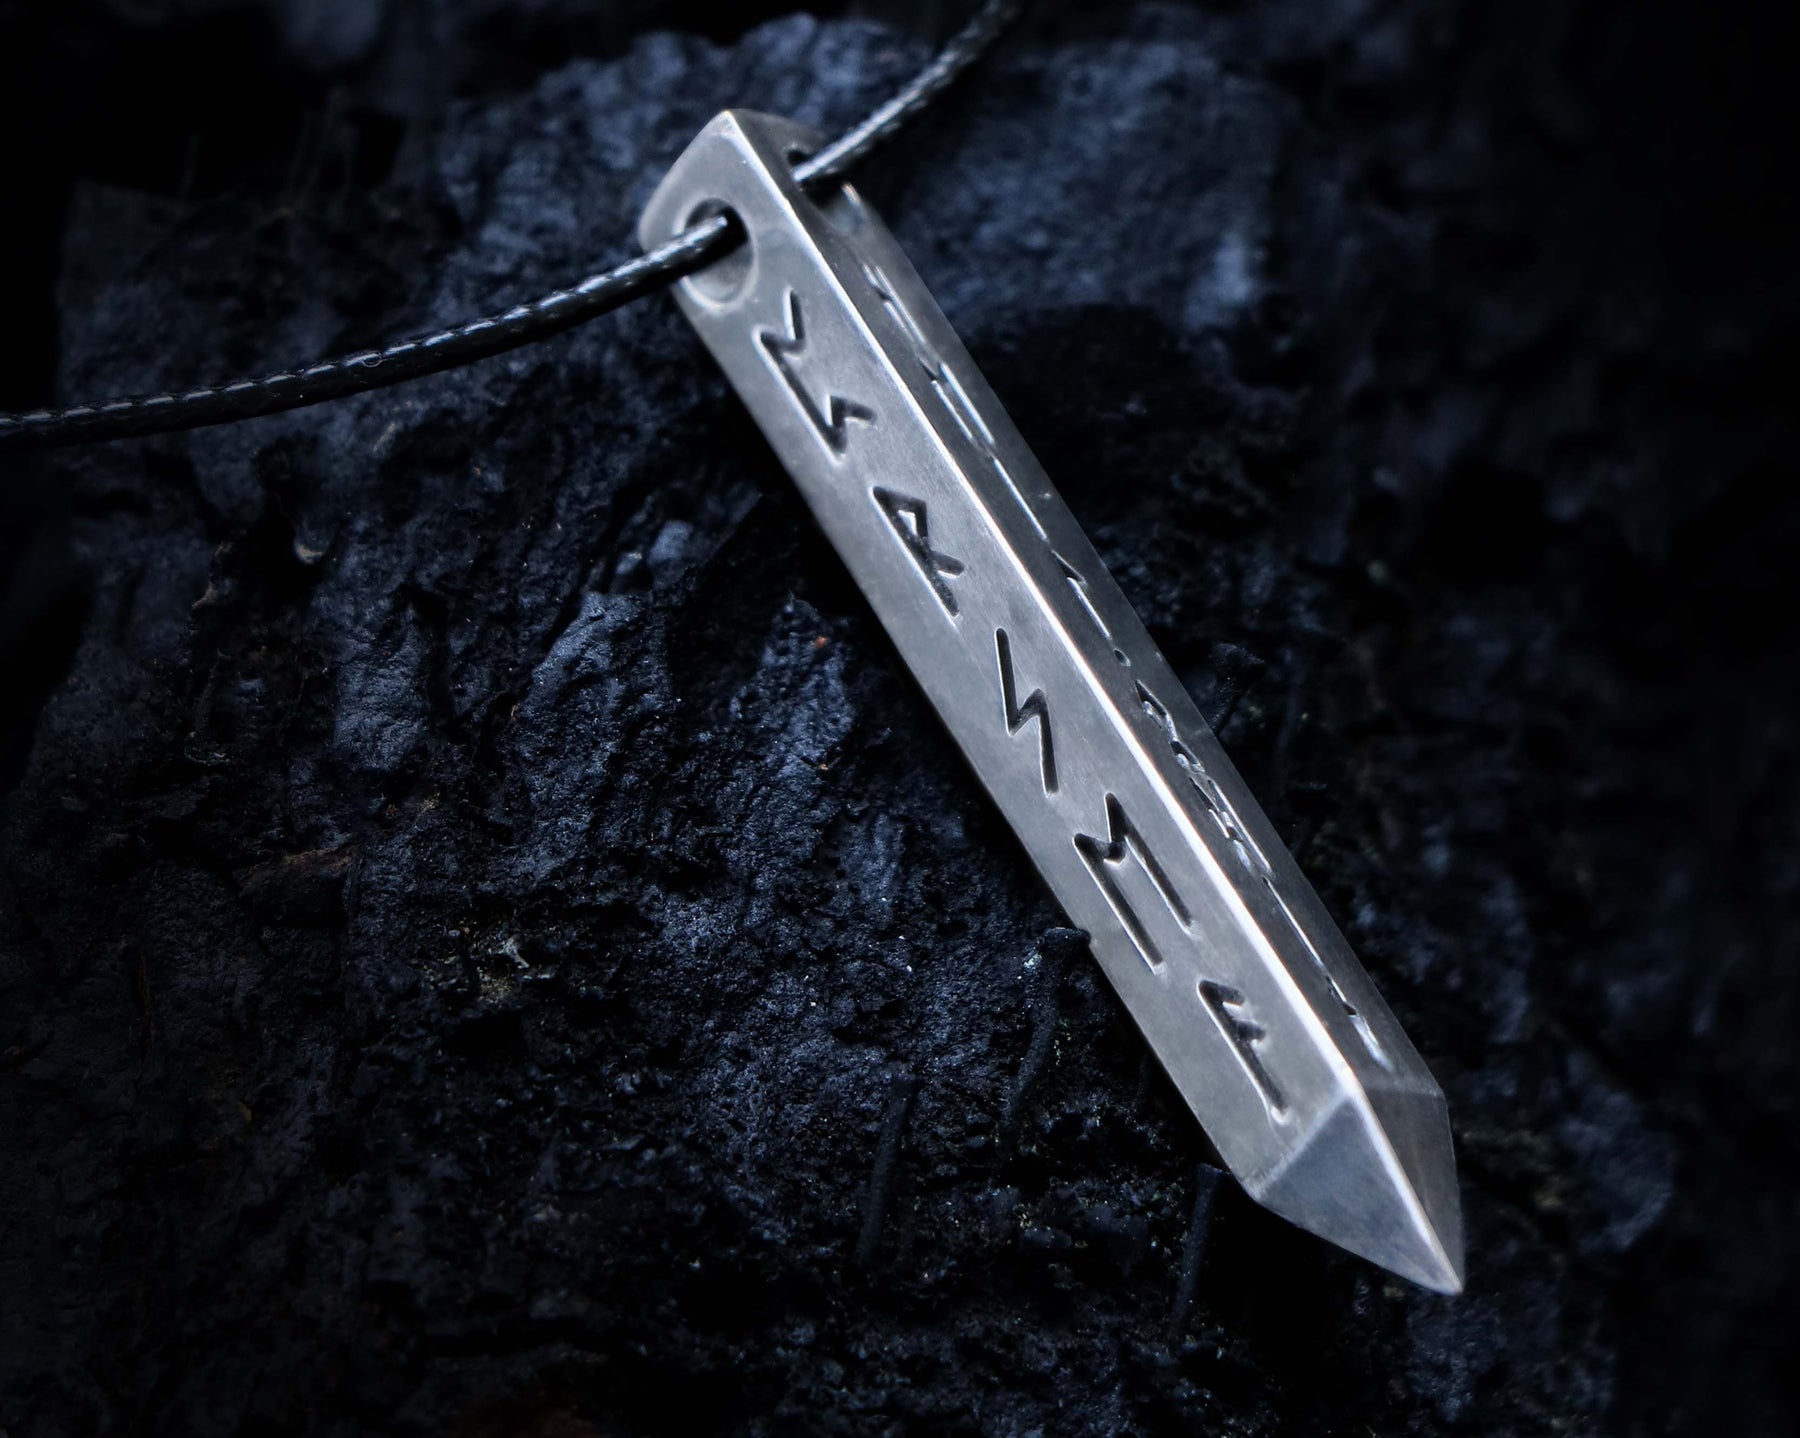 RUNIC AMULET to improve PREDICTION abilities